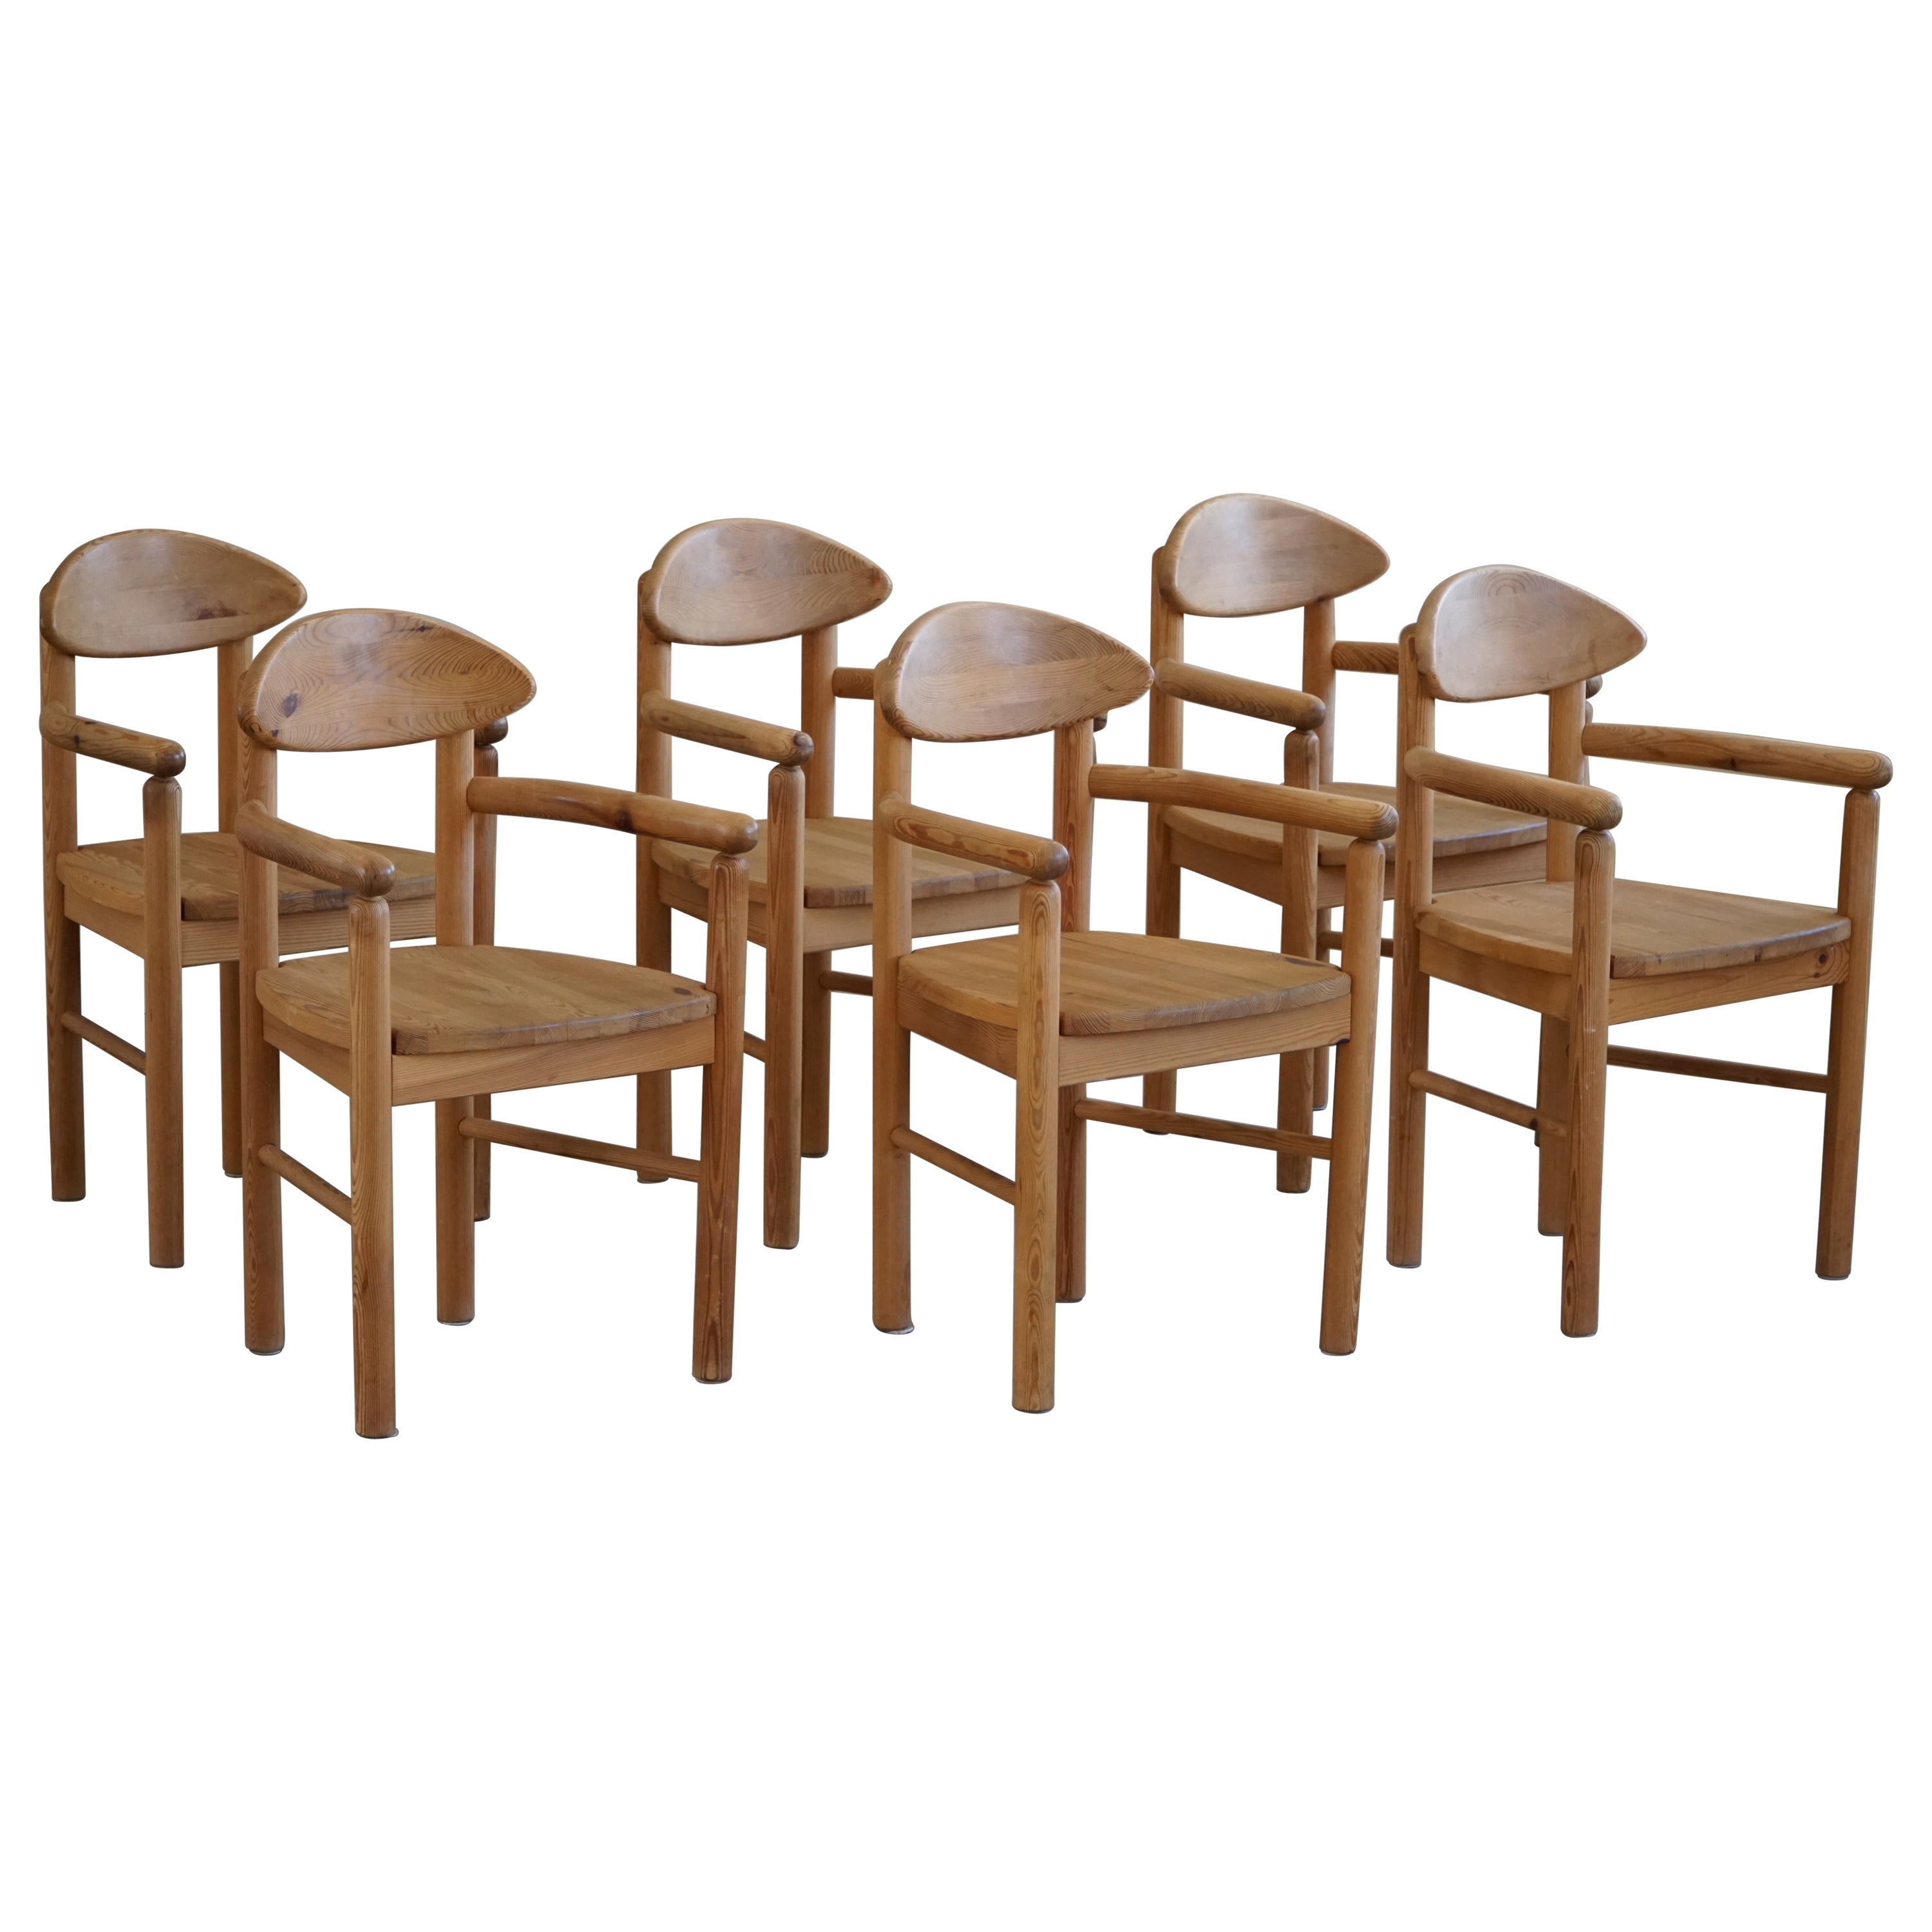 Set of 6 Dining Chairs in Solid Pine, Rainer Daumiller, Danish Modern, 1970s For Sale